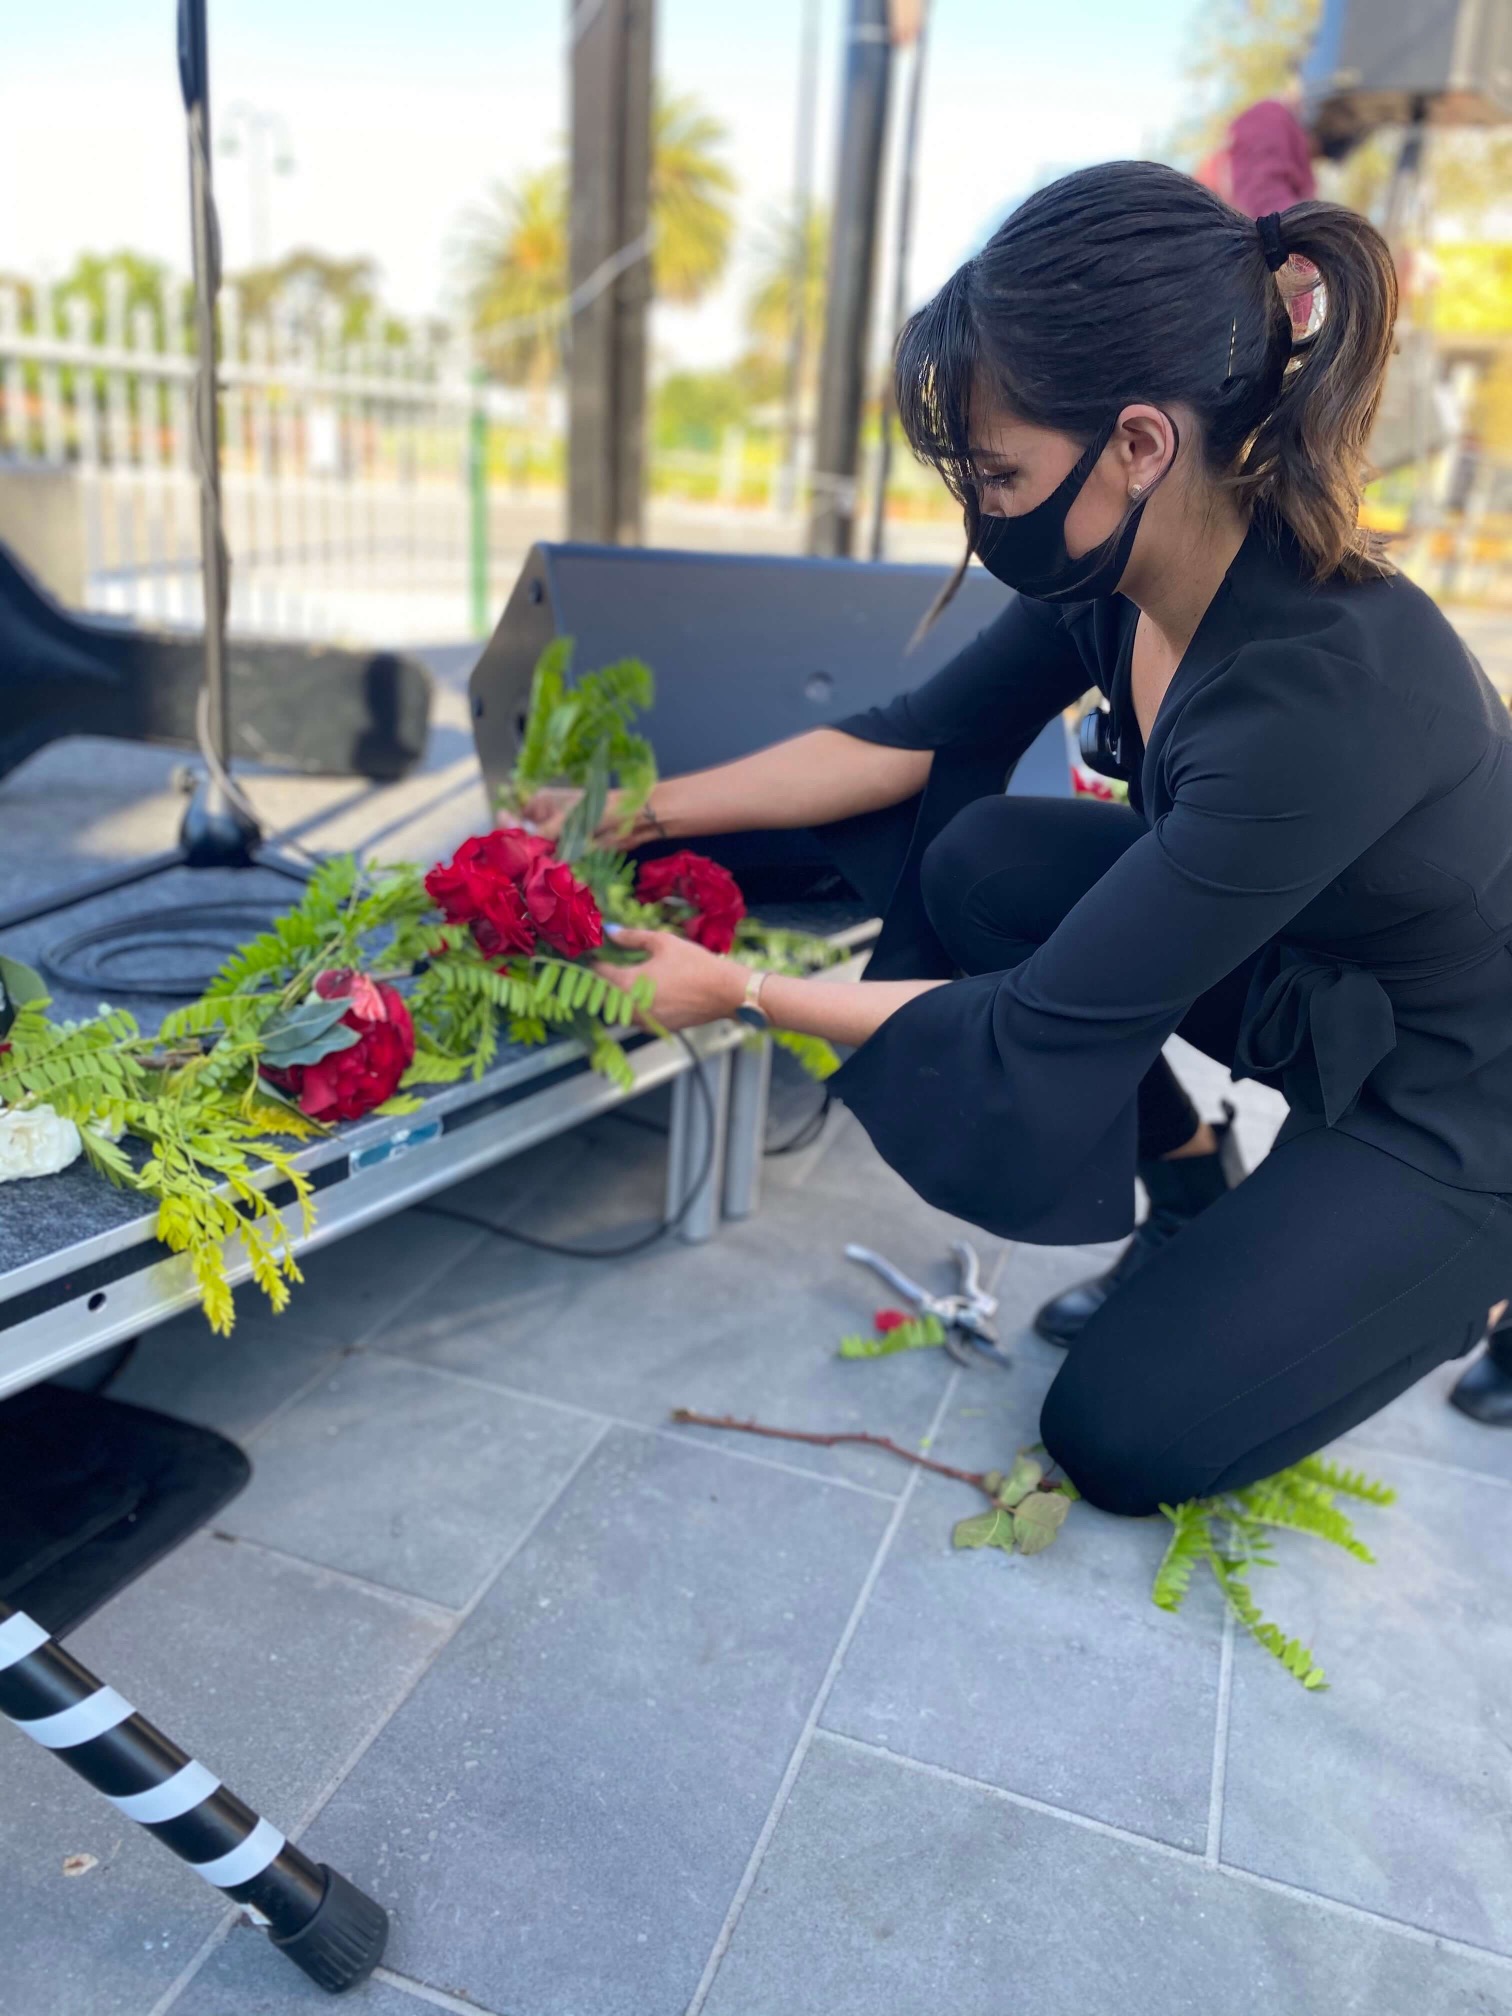 Staff members helps setup flowers at Latrobe City Council Outdoor Dining Initiative October 2020